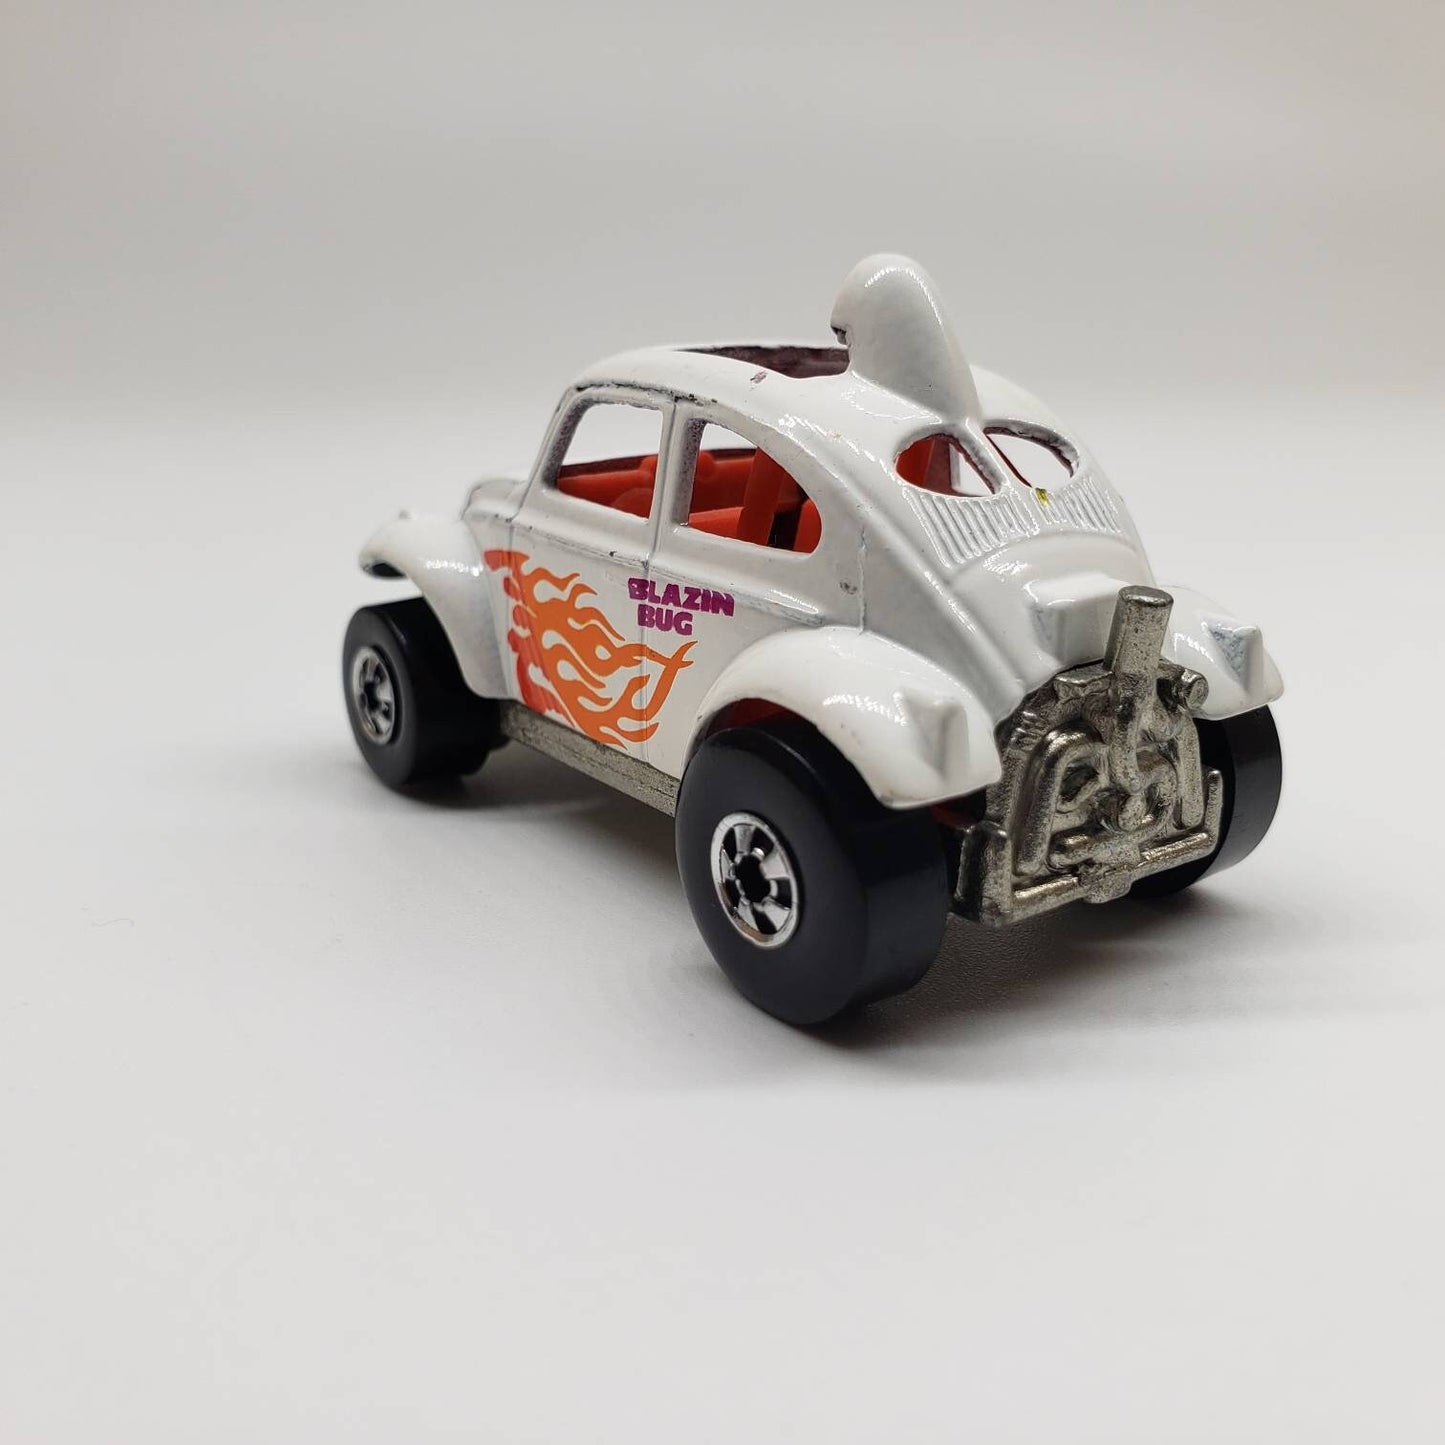 Hot Wheels Baja Bug White Mainline Perfect Birthday Gift Miniature Collectable Scale Model Toy Car